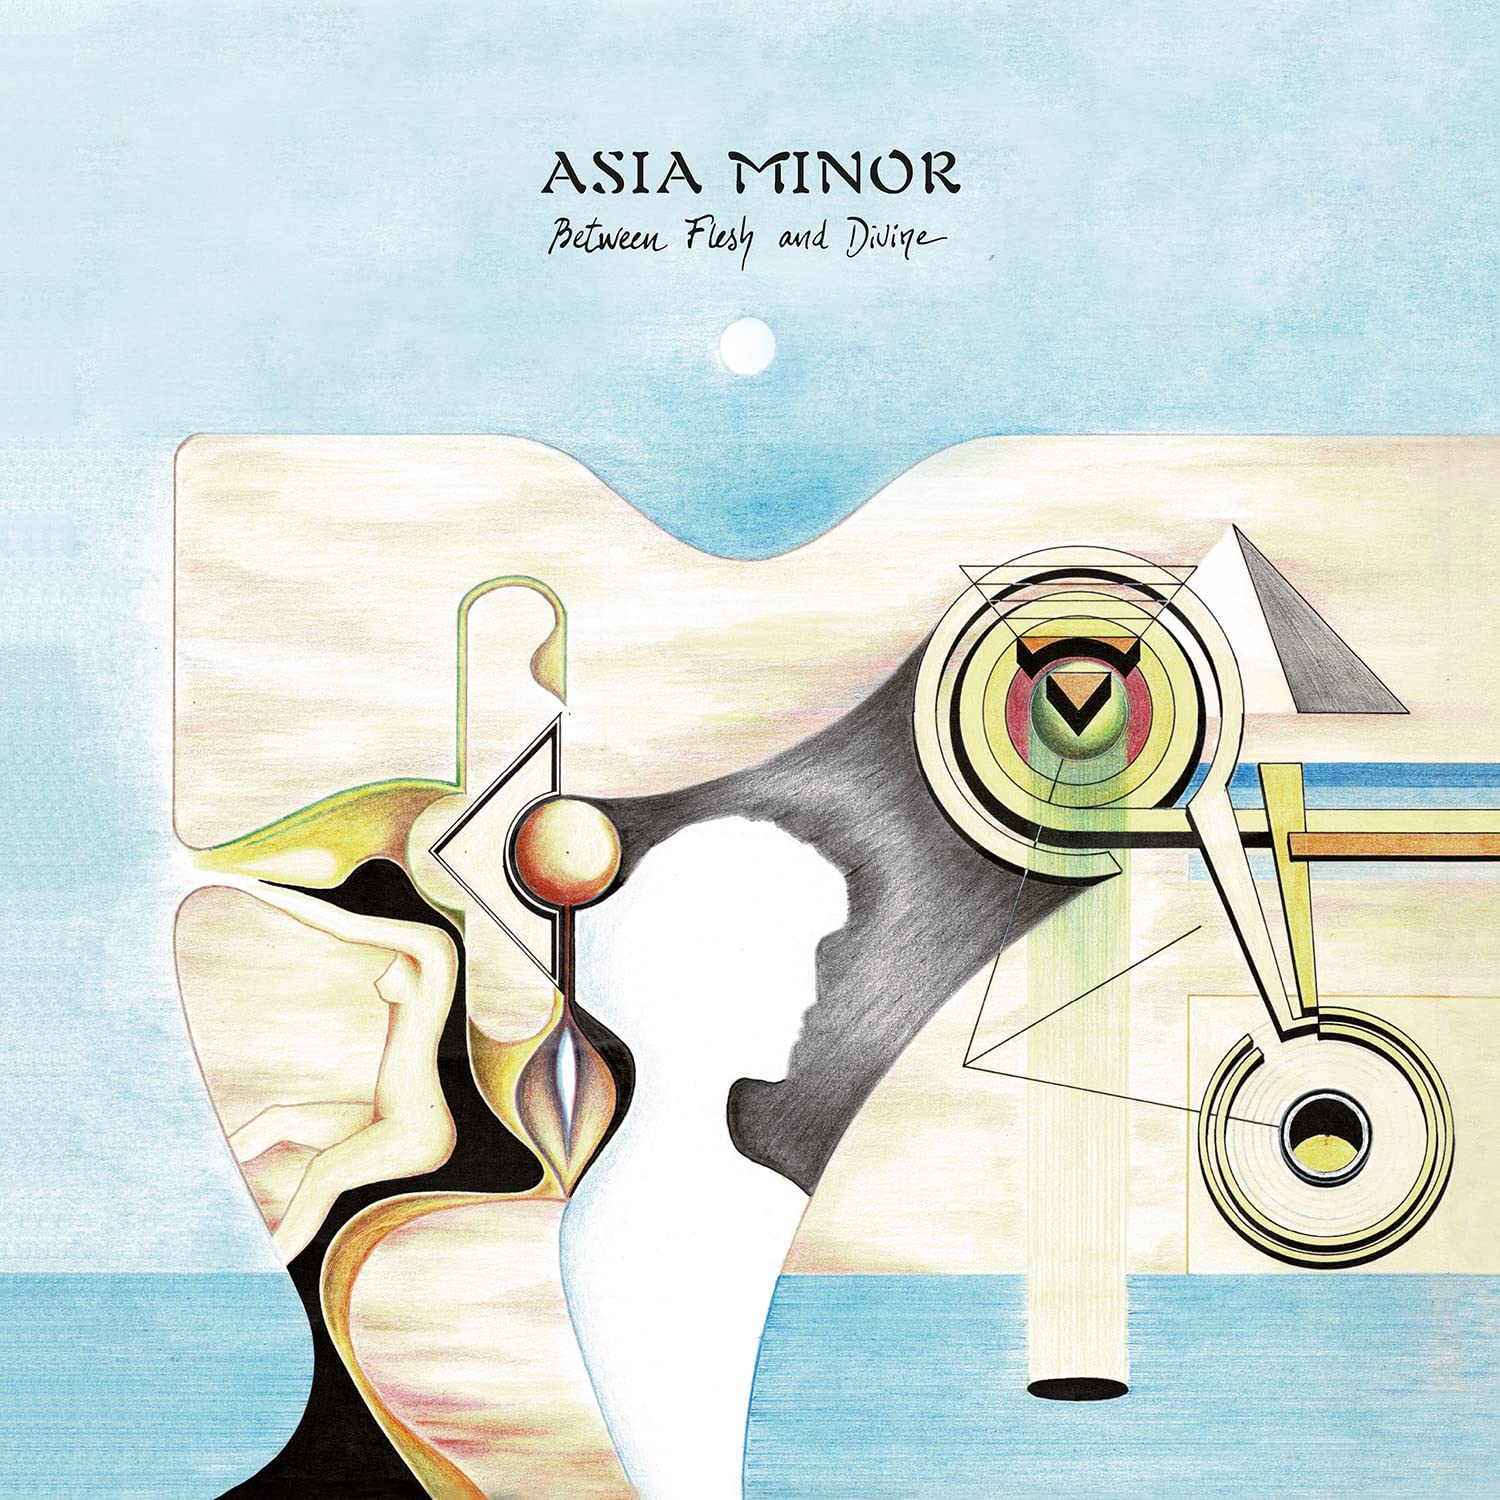 Asia divine. Asia Minor - between Flesh and Divine. Asia Minor группа. Asia Minor - between Flesh and Divine обложка альбома. Группа Asia альбомы.